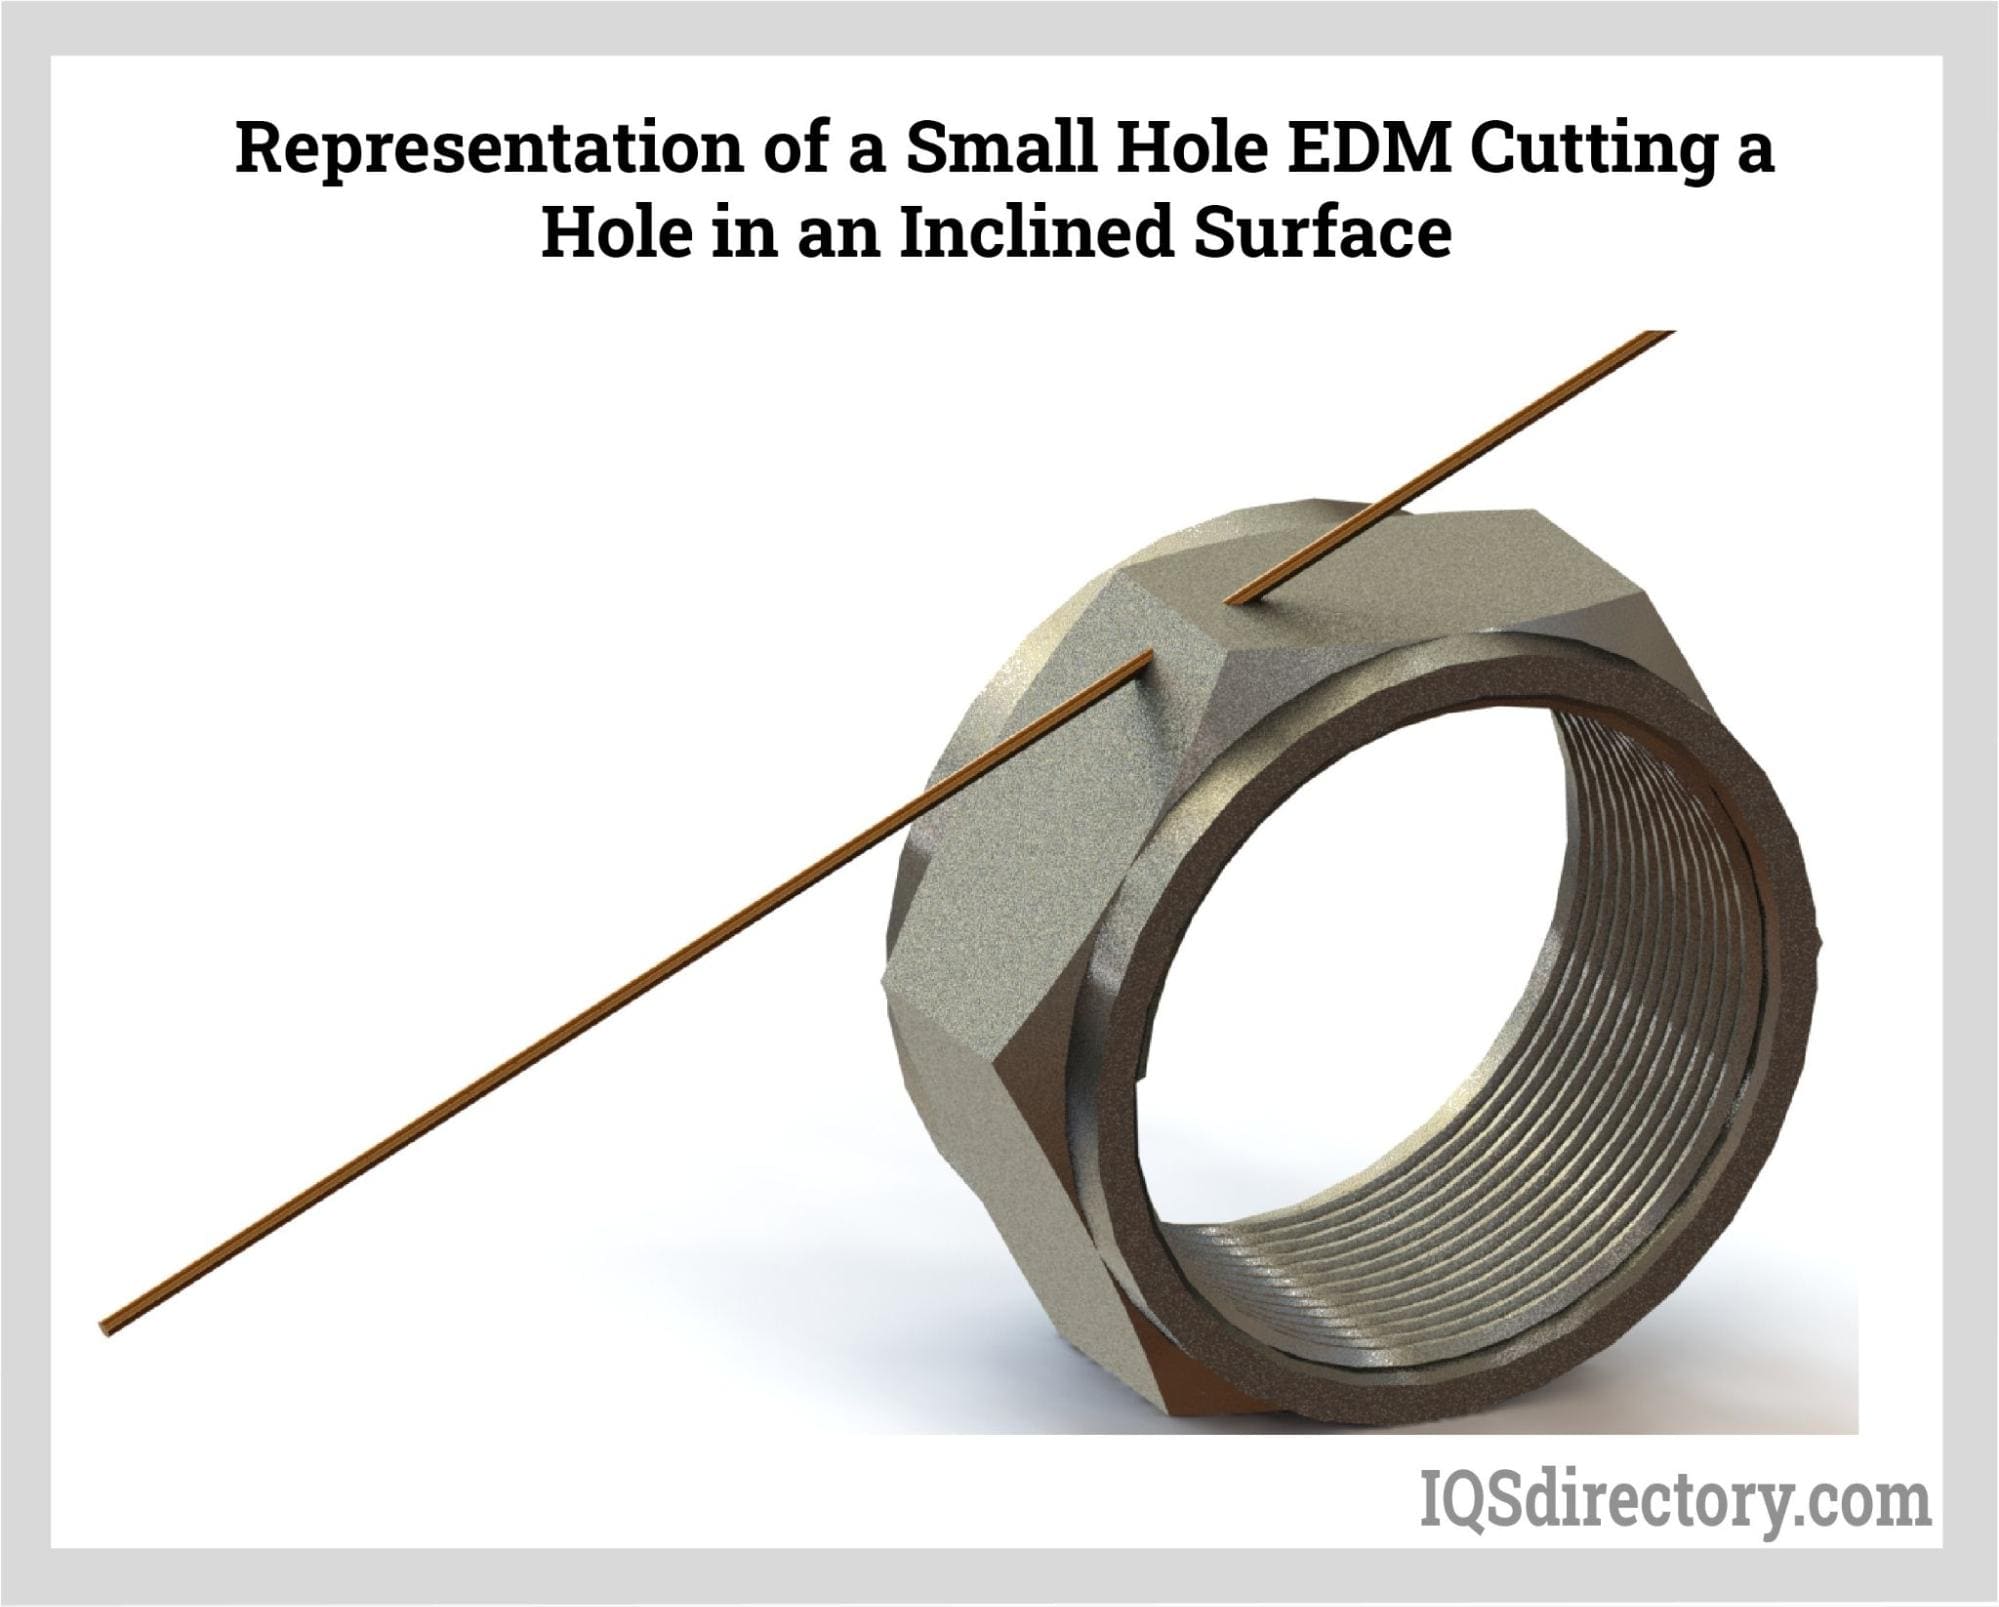 Representation of a Small Hole EDM Cutting a Hole in an Inclined Surface